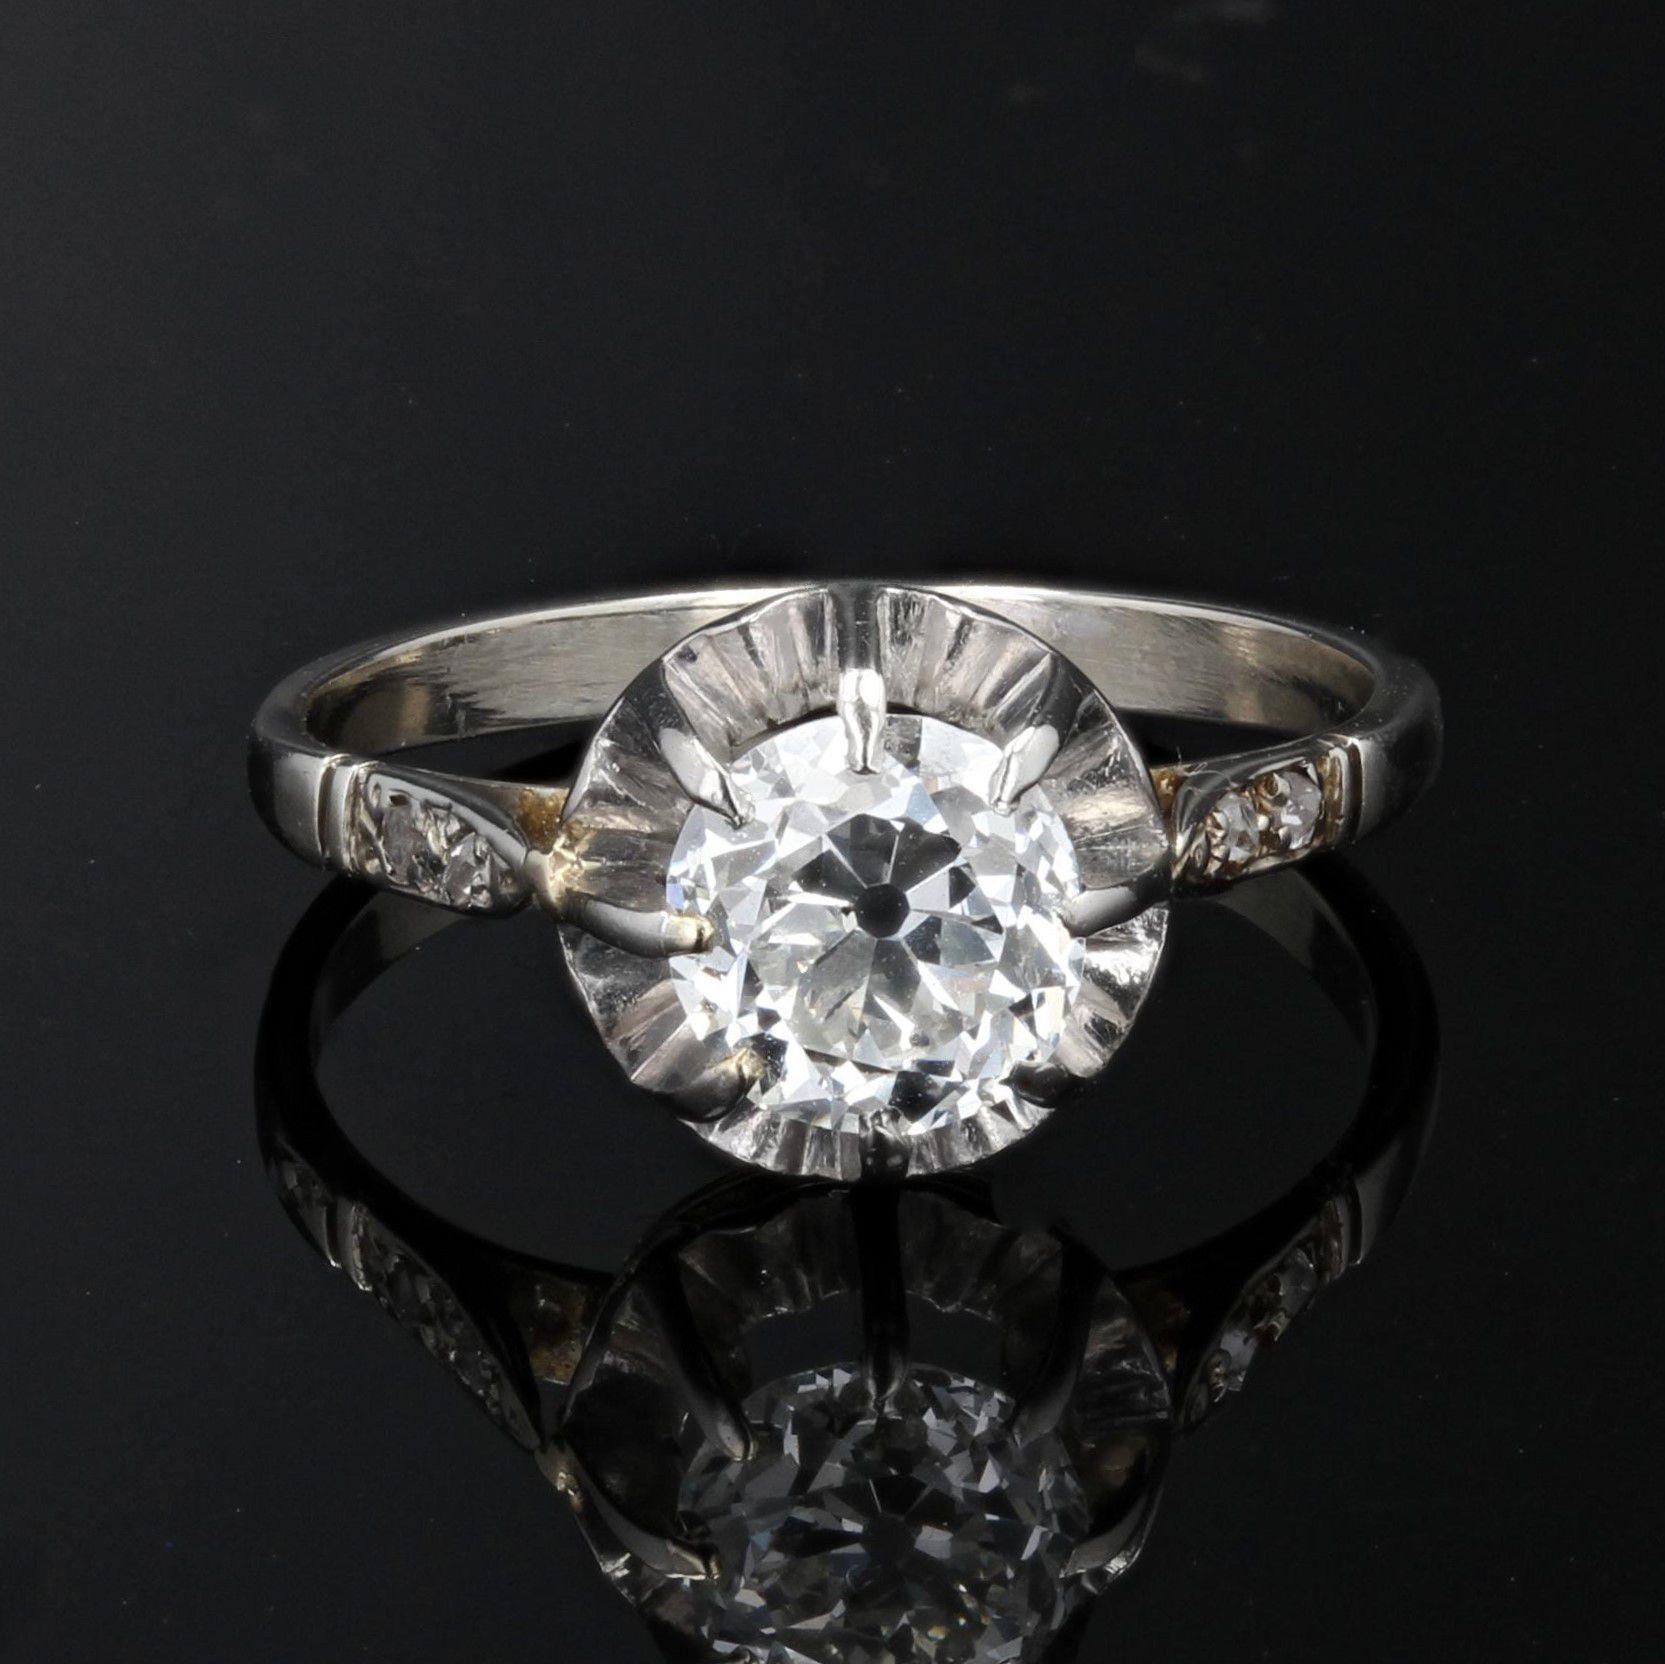 1900s engagement rings